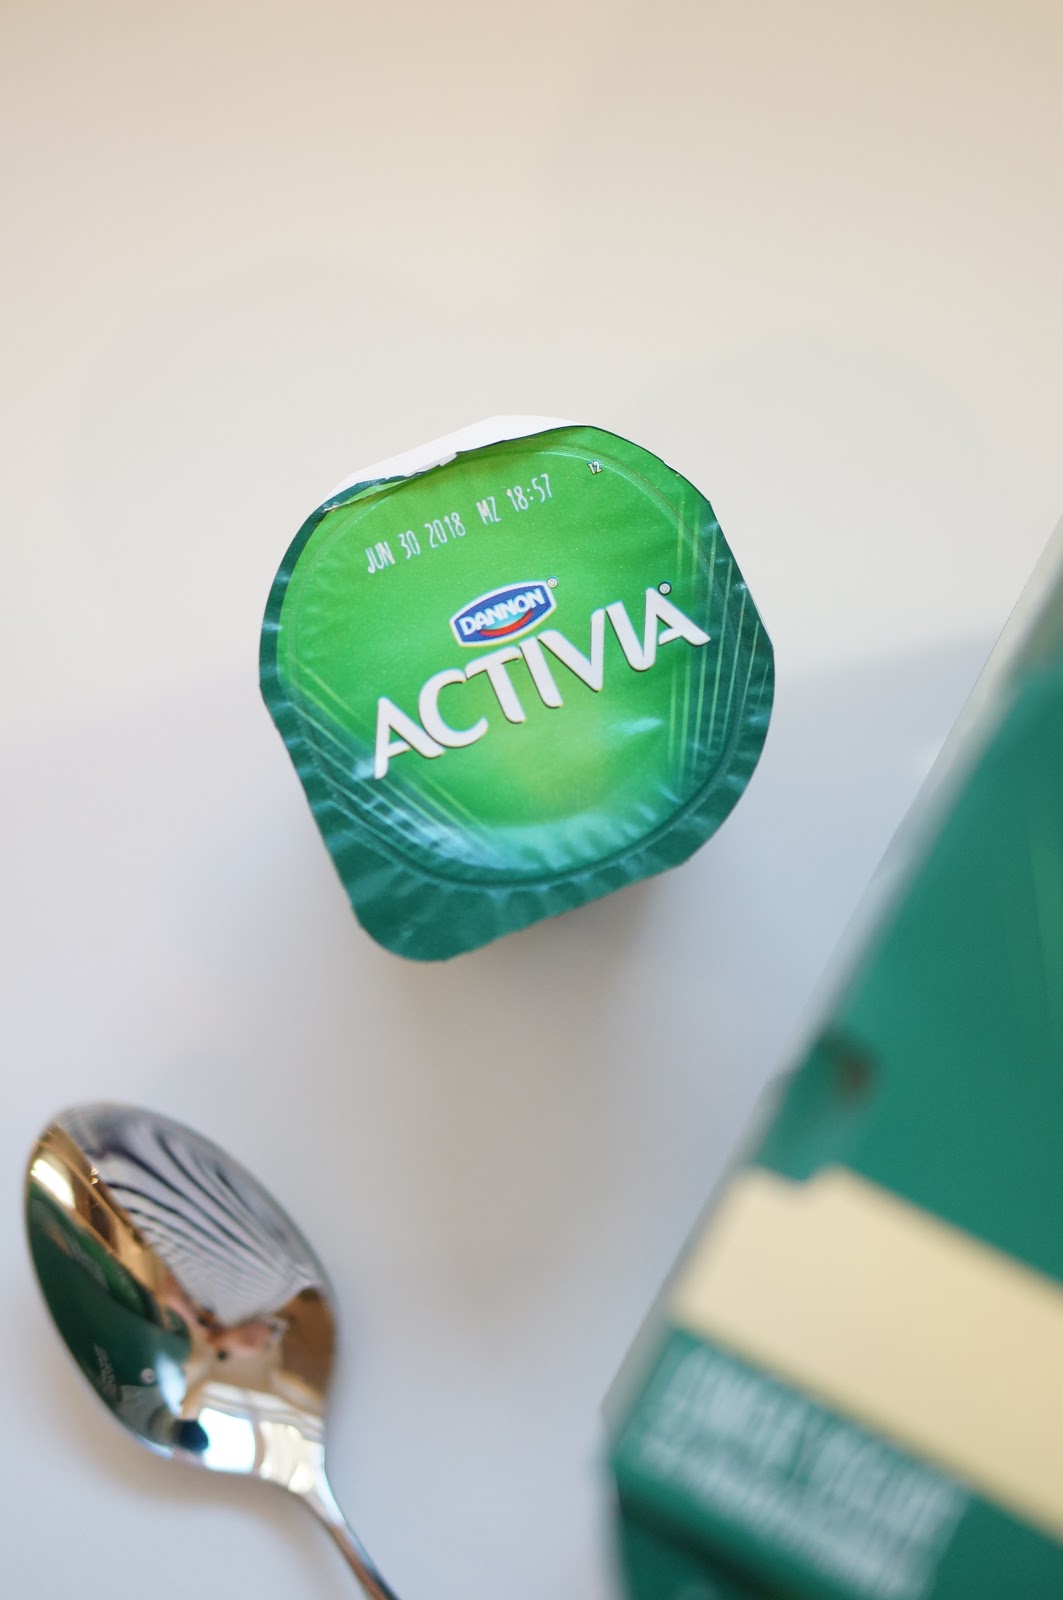 Popular North Carolina style blogger Rebecca Lately shares her 2 week Activia challenge. Click here to read how she made a healthy switch in her routine!